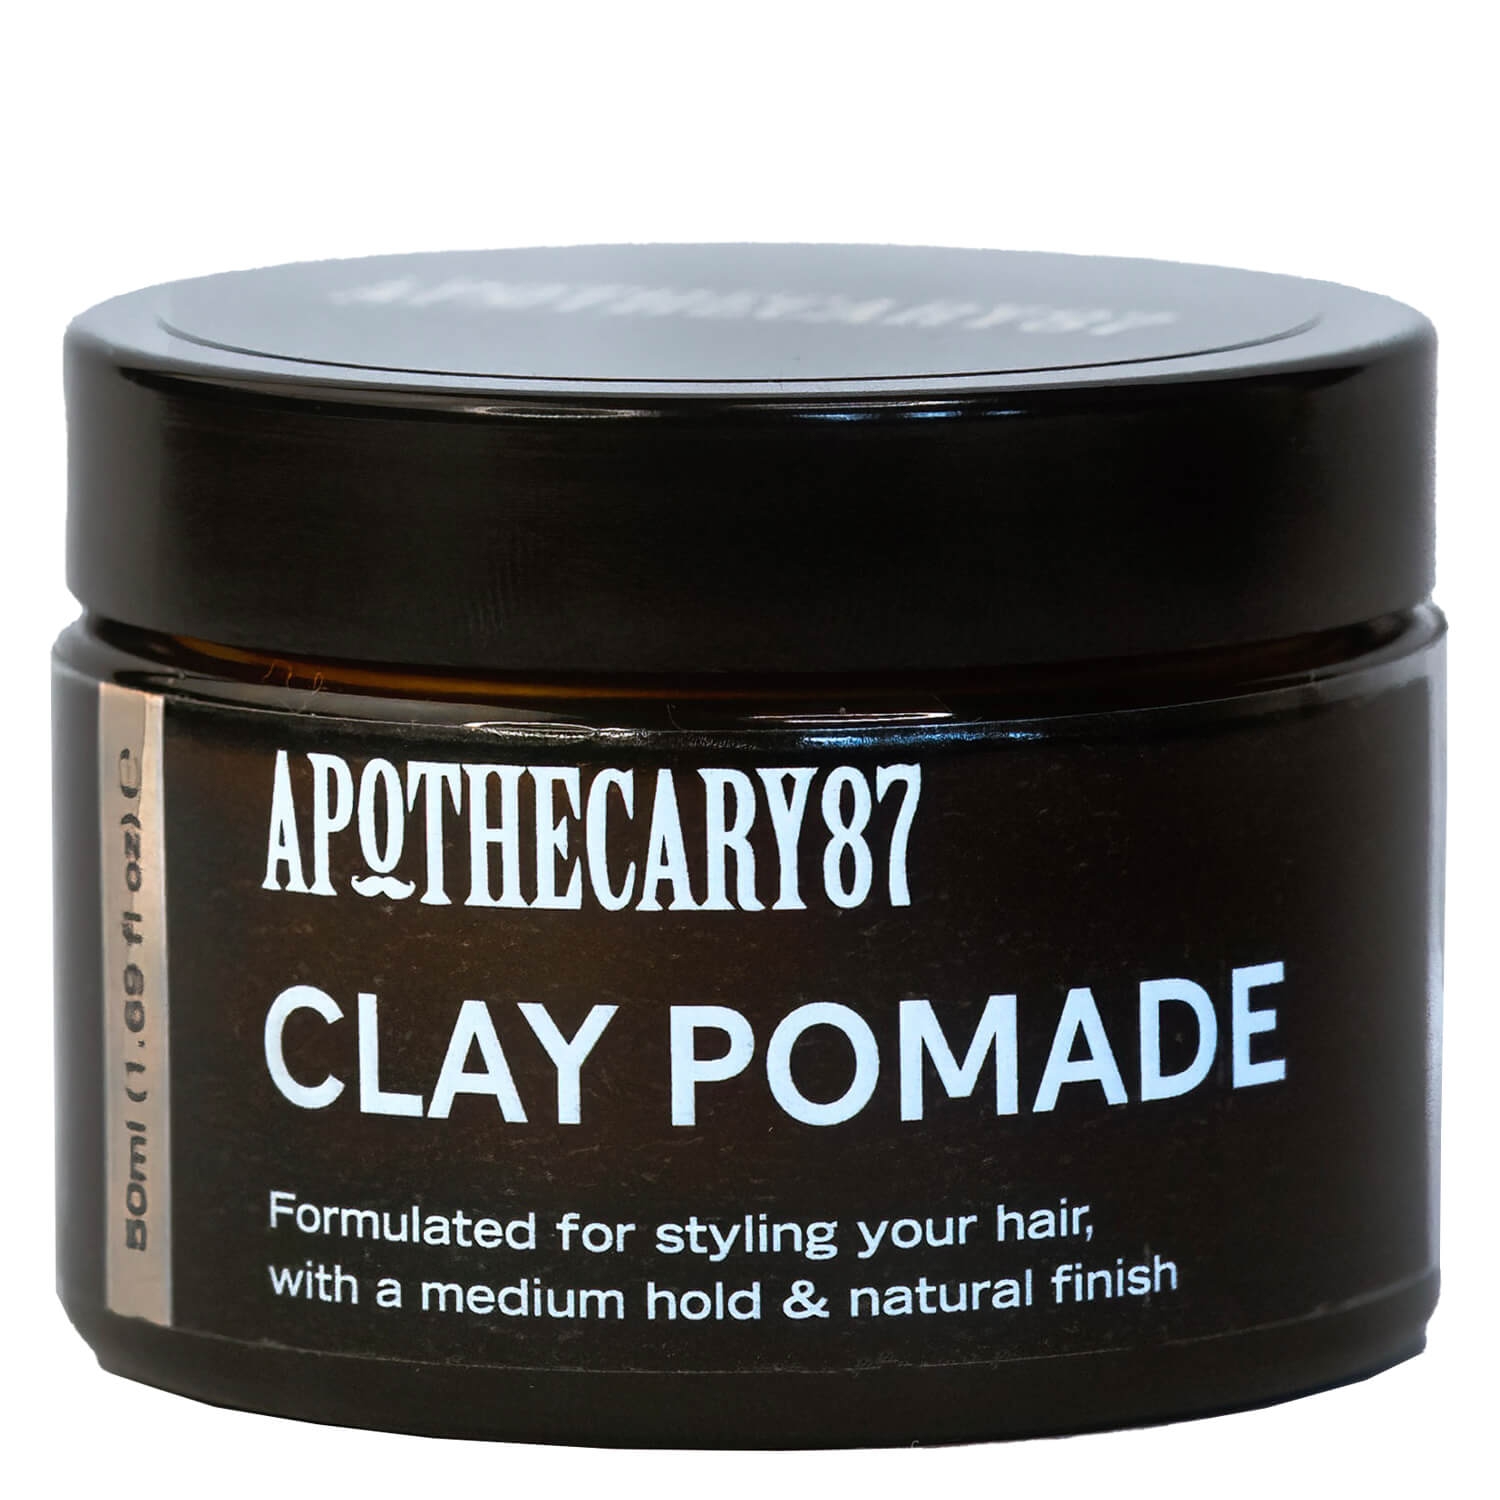 Product image from Apothecary87 Grooming - Clay Pomade Vanilla & Mango